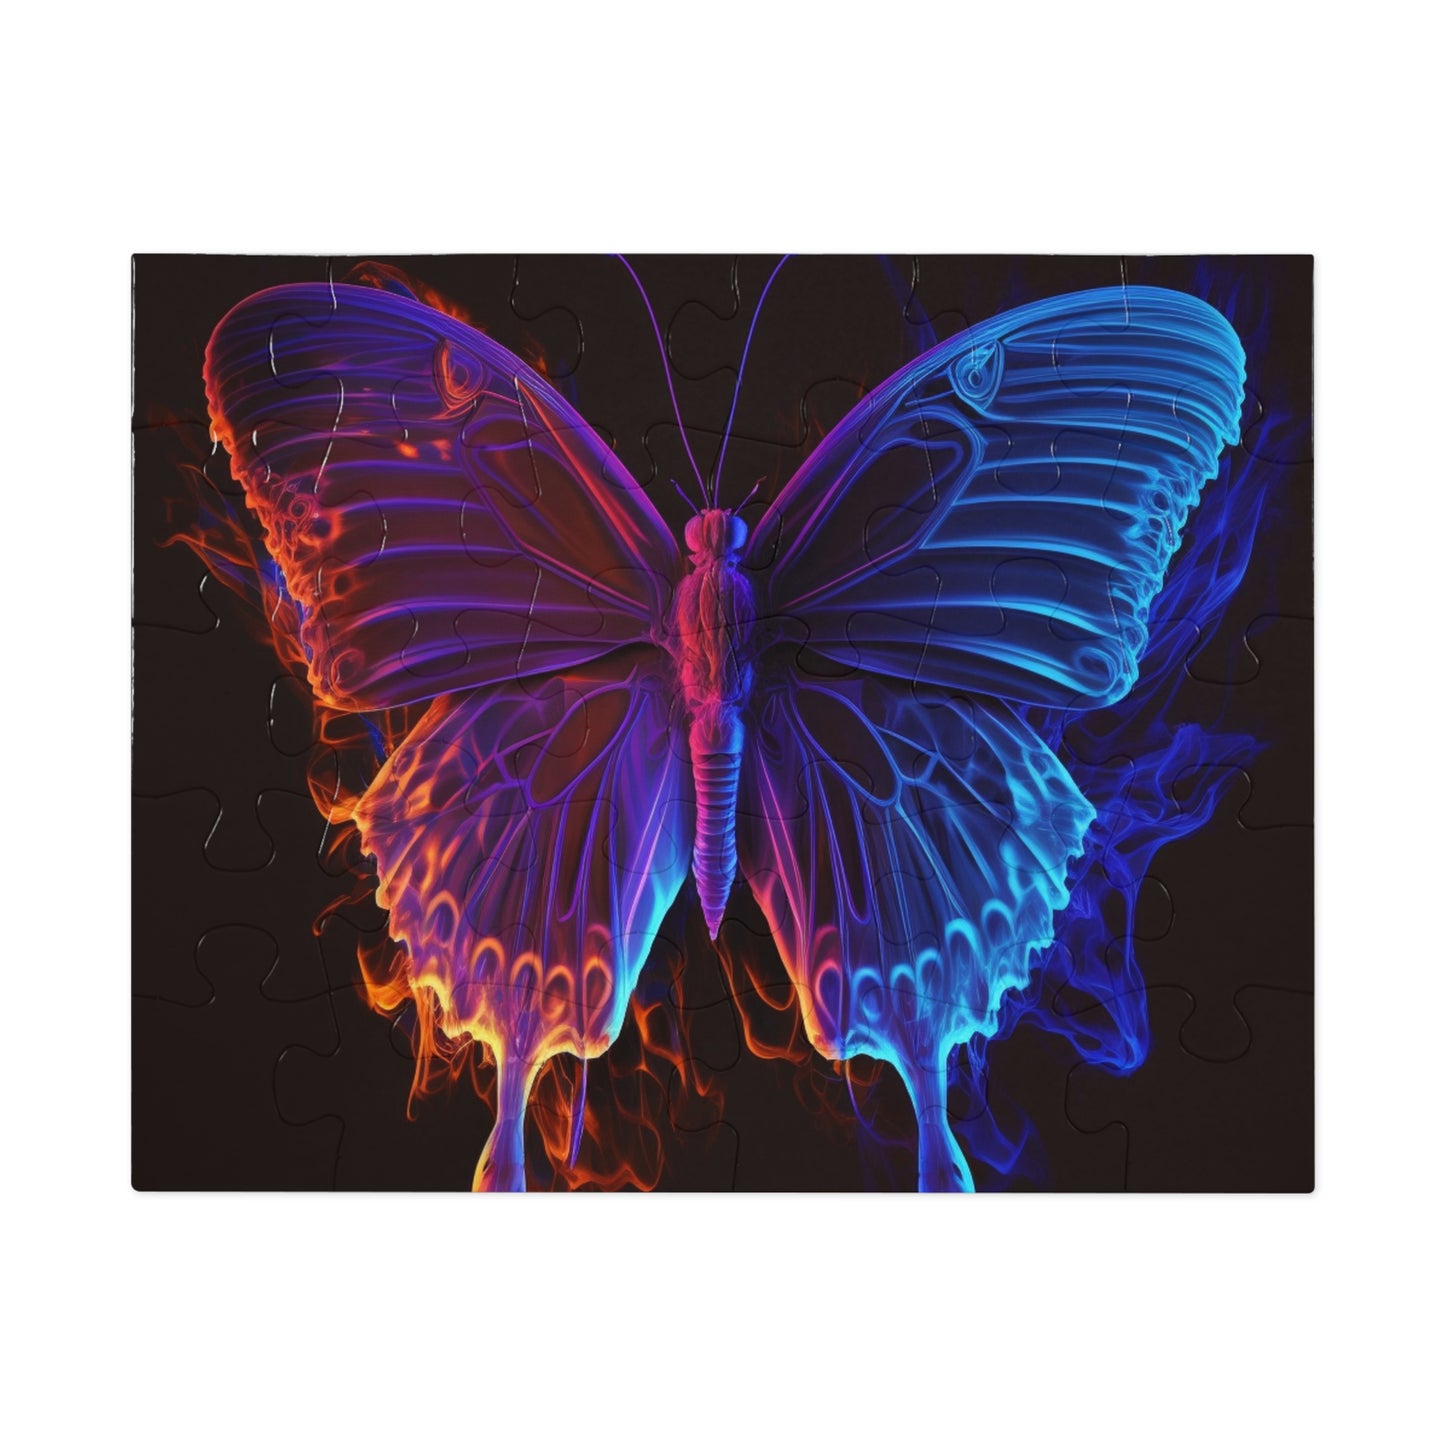 Jigsaw Puzzle (30, 110, 252, 500,1000-Piece) Thermal Butterfly 1